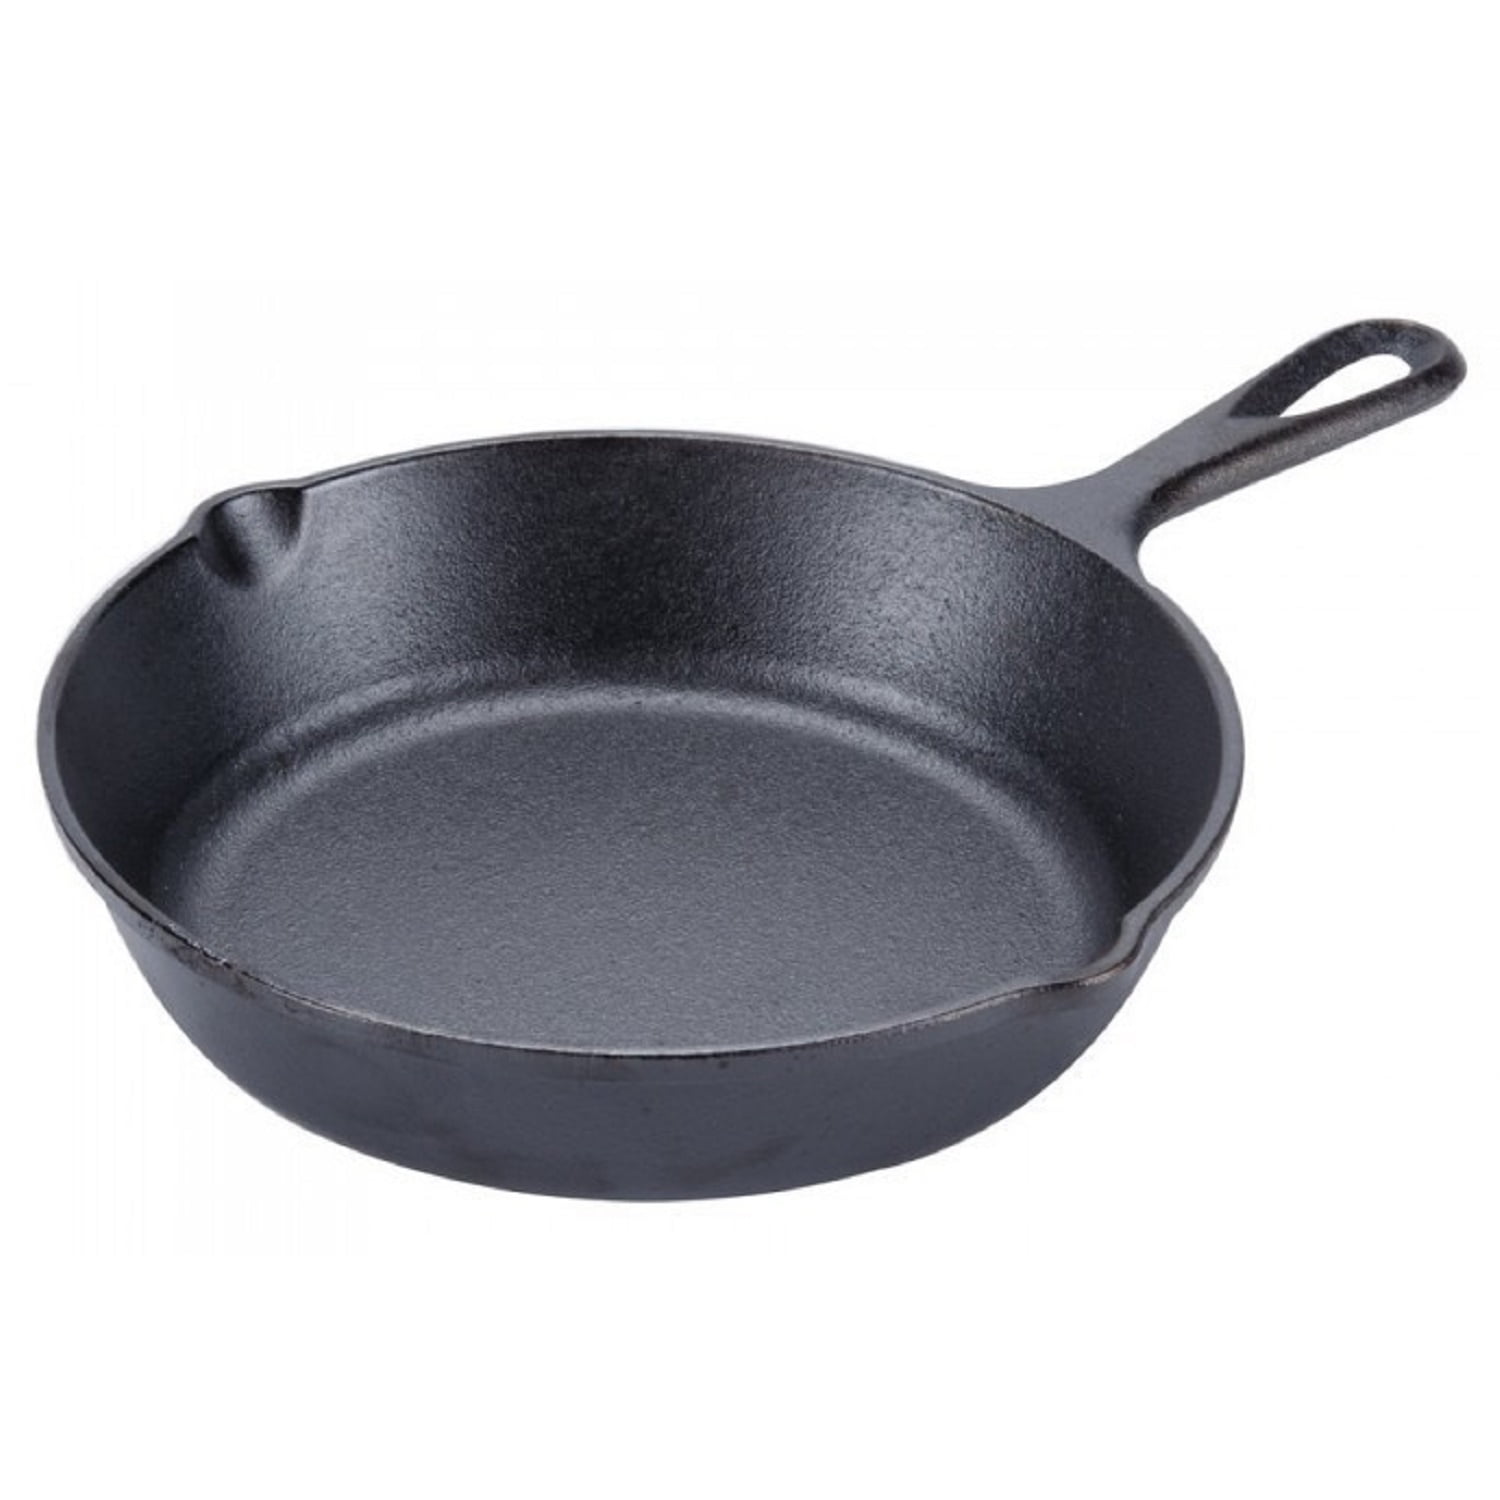 New in Box MOZUVE 6 Inch Cast Iron Skillet, Frying Pan with Drip